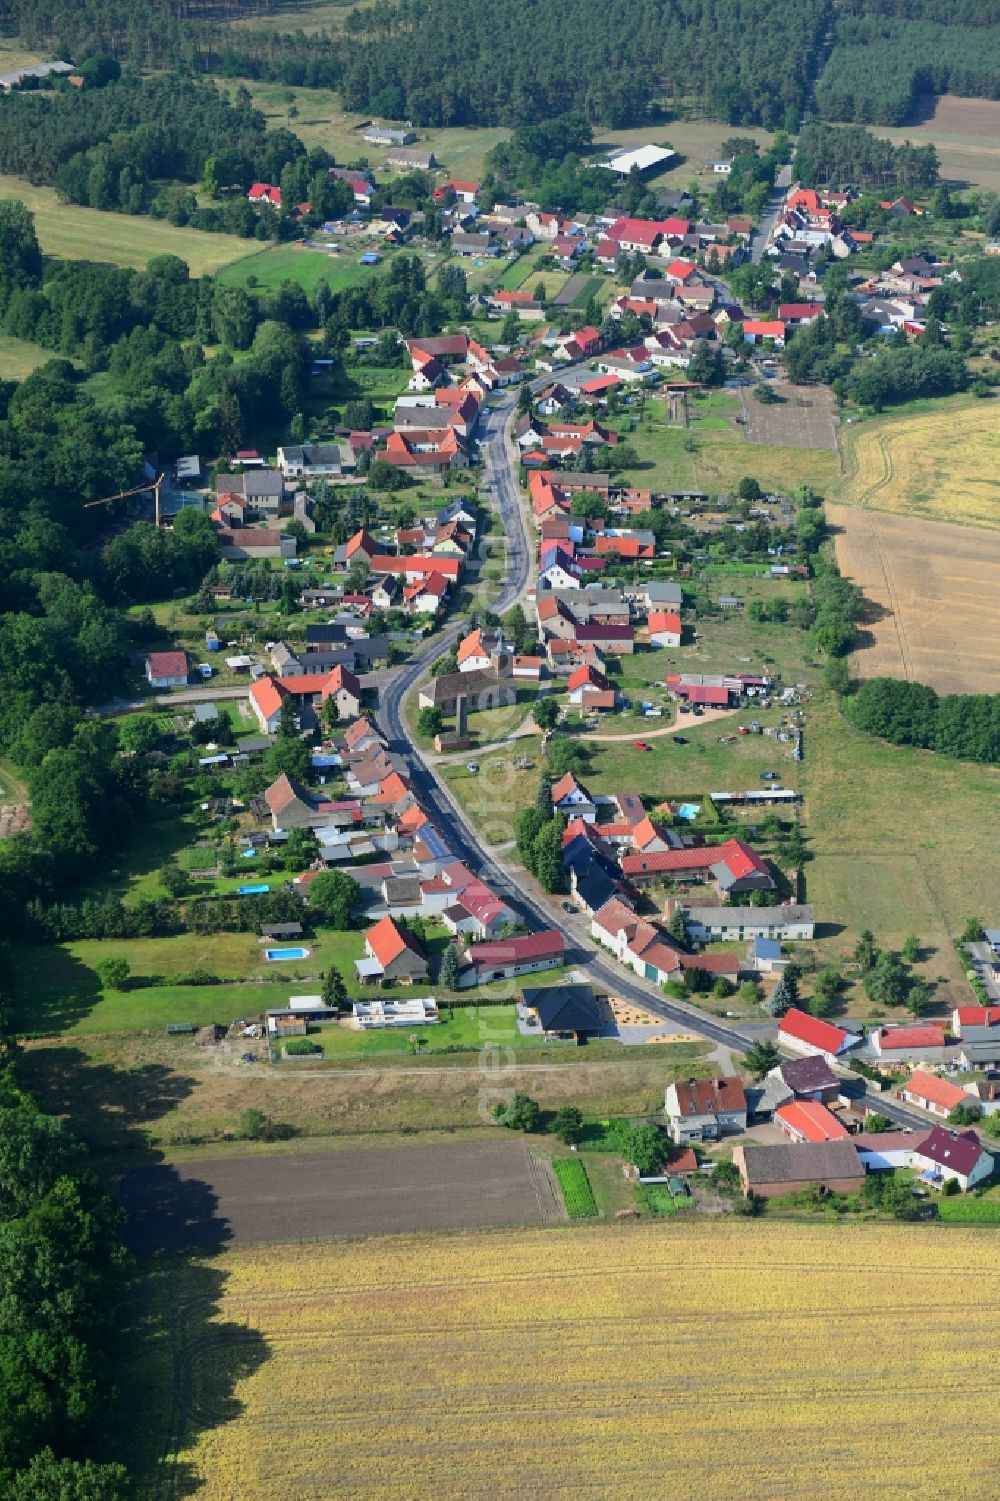 Gräben from the bird's eye view: Village - view on the edge of forested areas in Graeben in the state Brandenburg, Germany